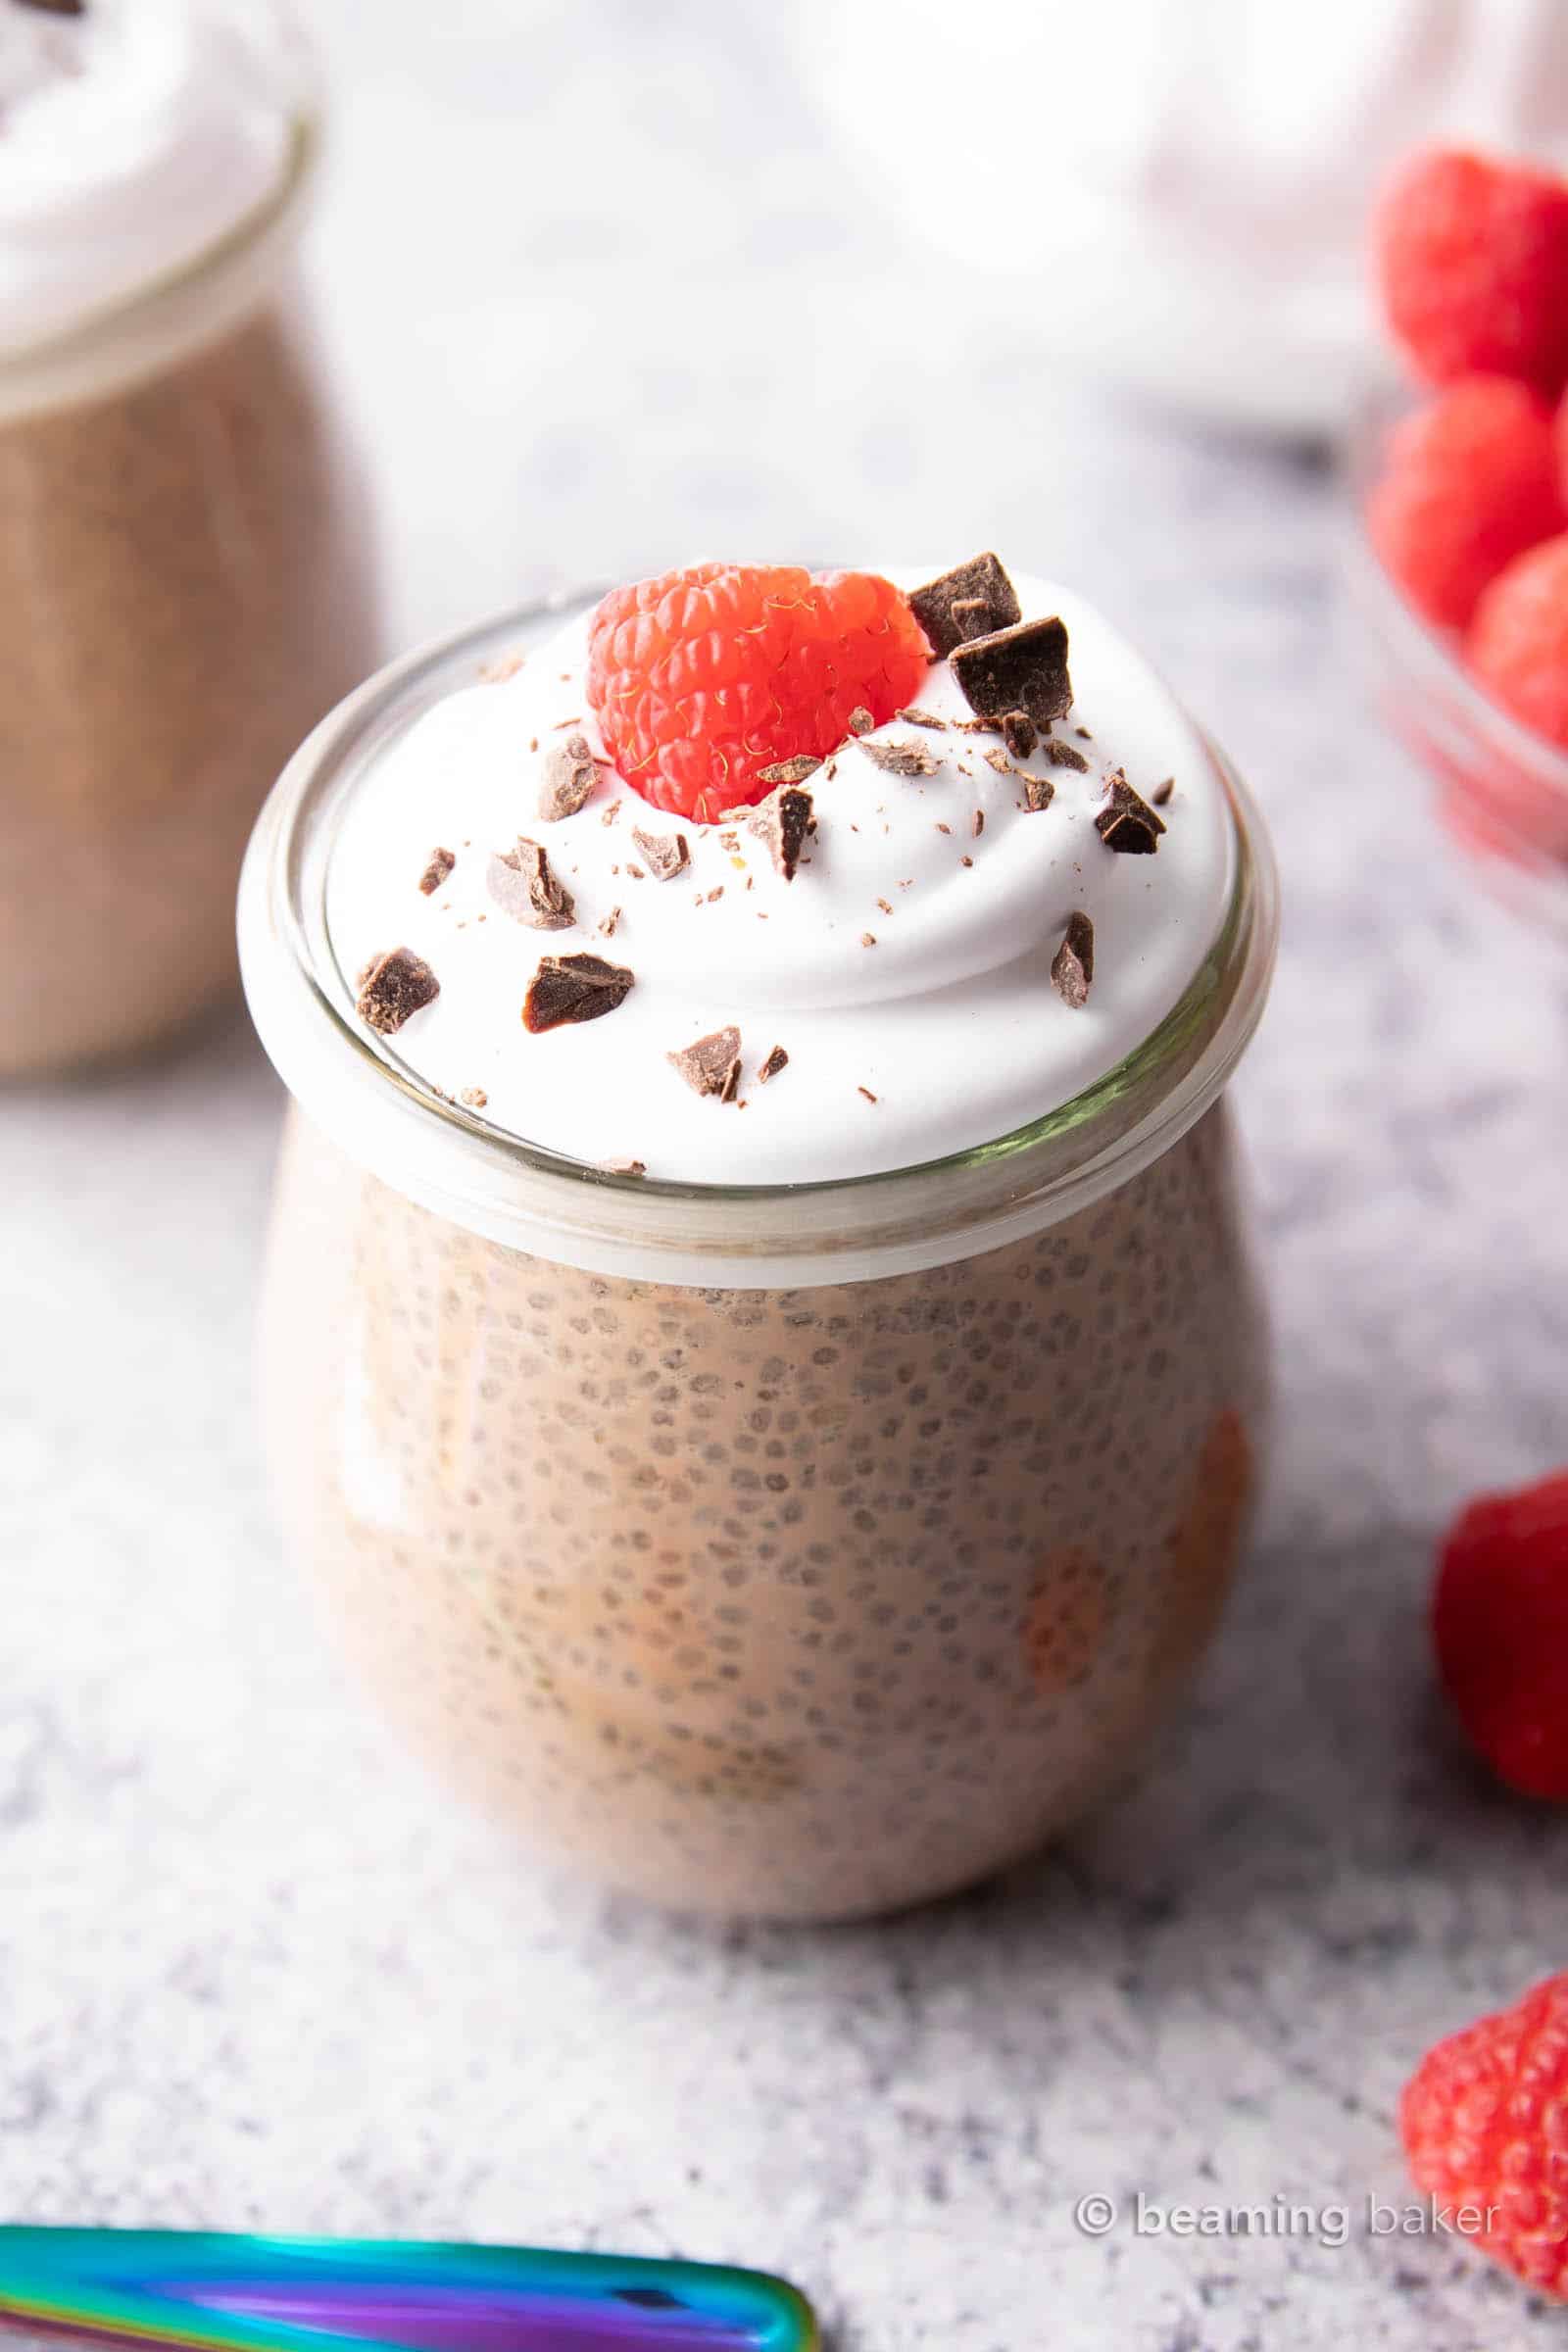 Low Carb Chocolate Chia Pudding (Keto): this rich & chocolatey keto chocolate chia pudding recipe is the best—made with simple ingredients, creamy and thick, and Low Carb! Keto chia pudding never tasted so good. #Keto #KetoDessert #LowCarb #ChiaPudding | Recipe at BeamingBaker.com